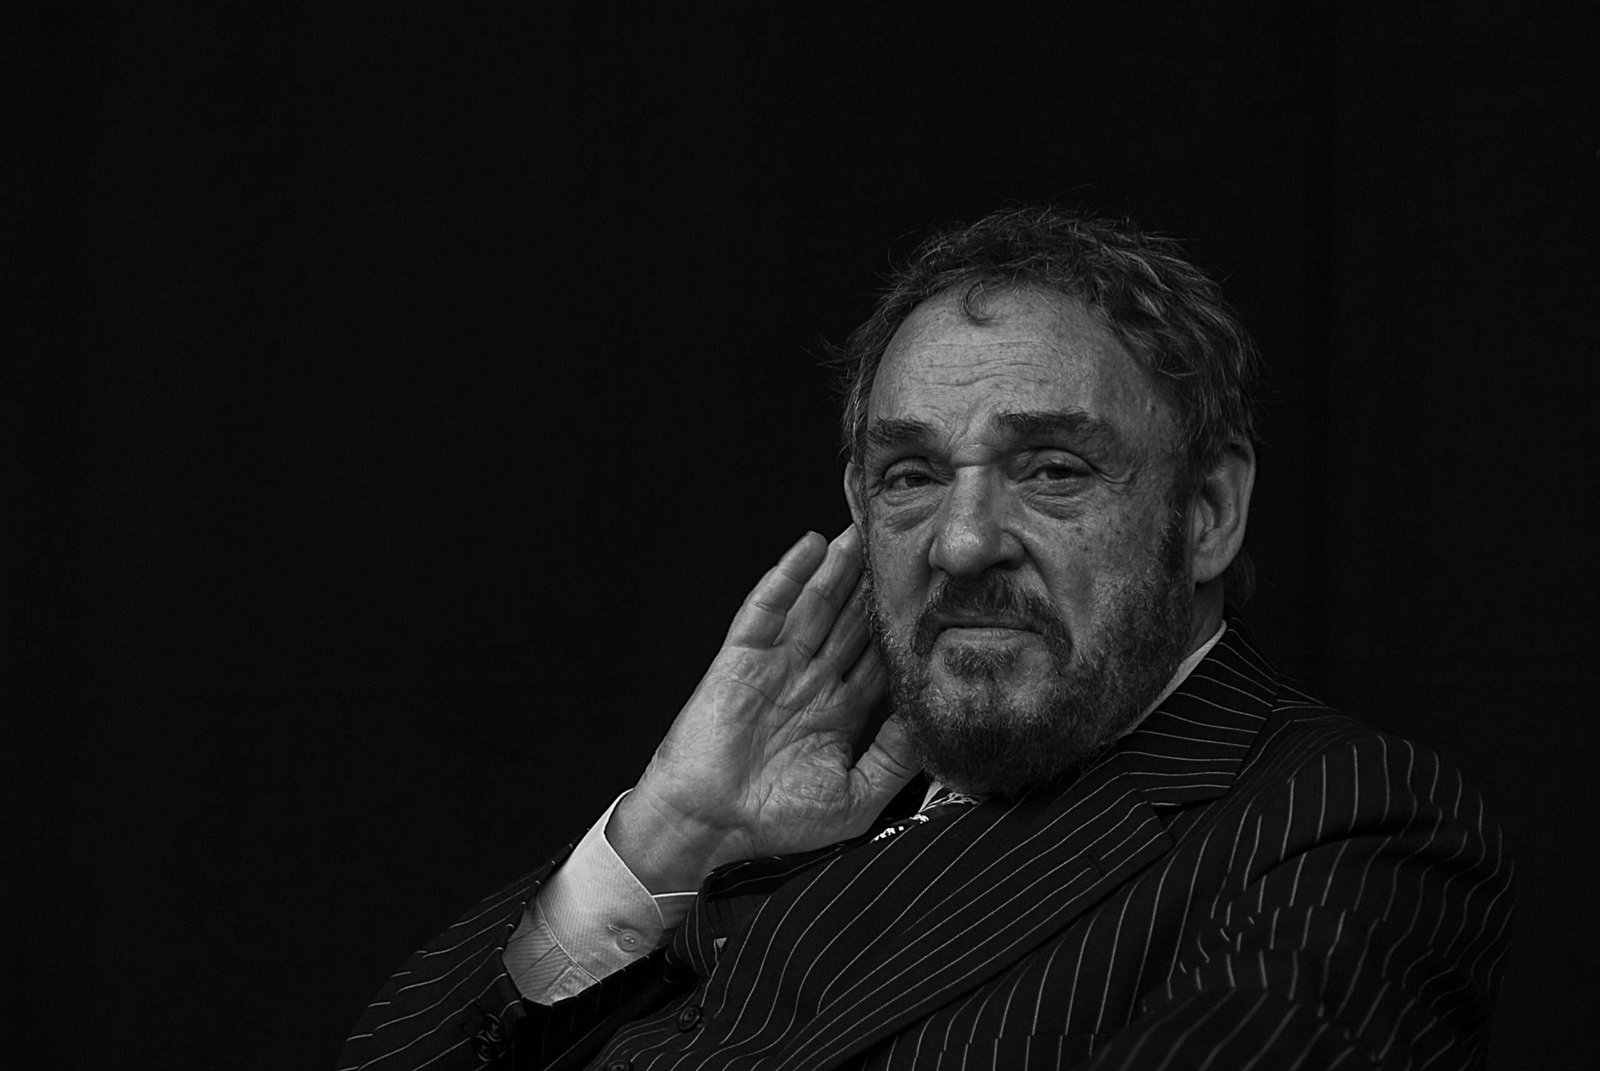 John Rhys-Davies is a Welsh actor best known for portraying Sallah in the Indiana Jones franchise, Gimli in The Lord of the Rings trilogy, Vasco Rodrigues in the miniseries Shōgun, General Leonid Pushkin in the James Bond film The Living Daylights, and Macro in I, Claudius. Ghost photographed him at the Facts Convention Ghent in 2015.